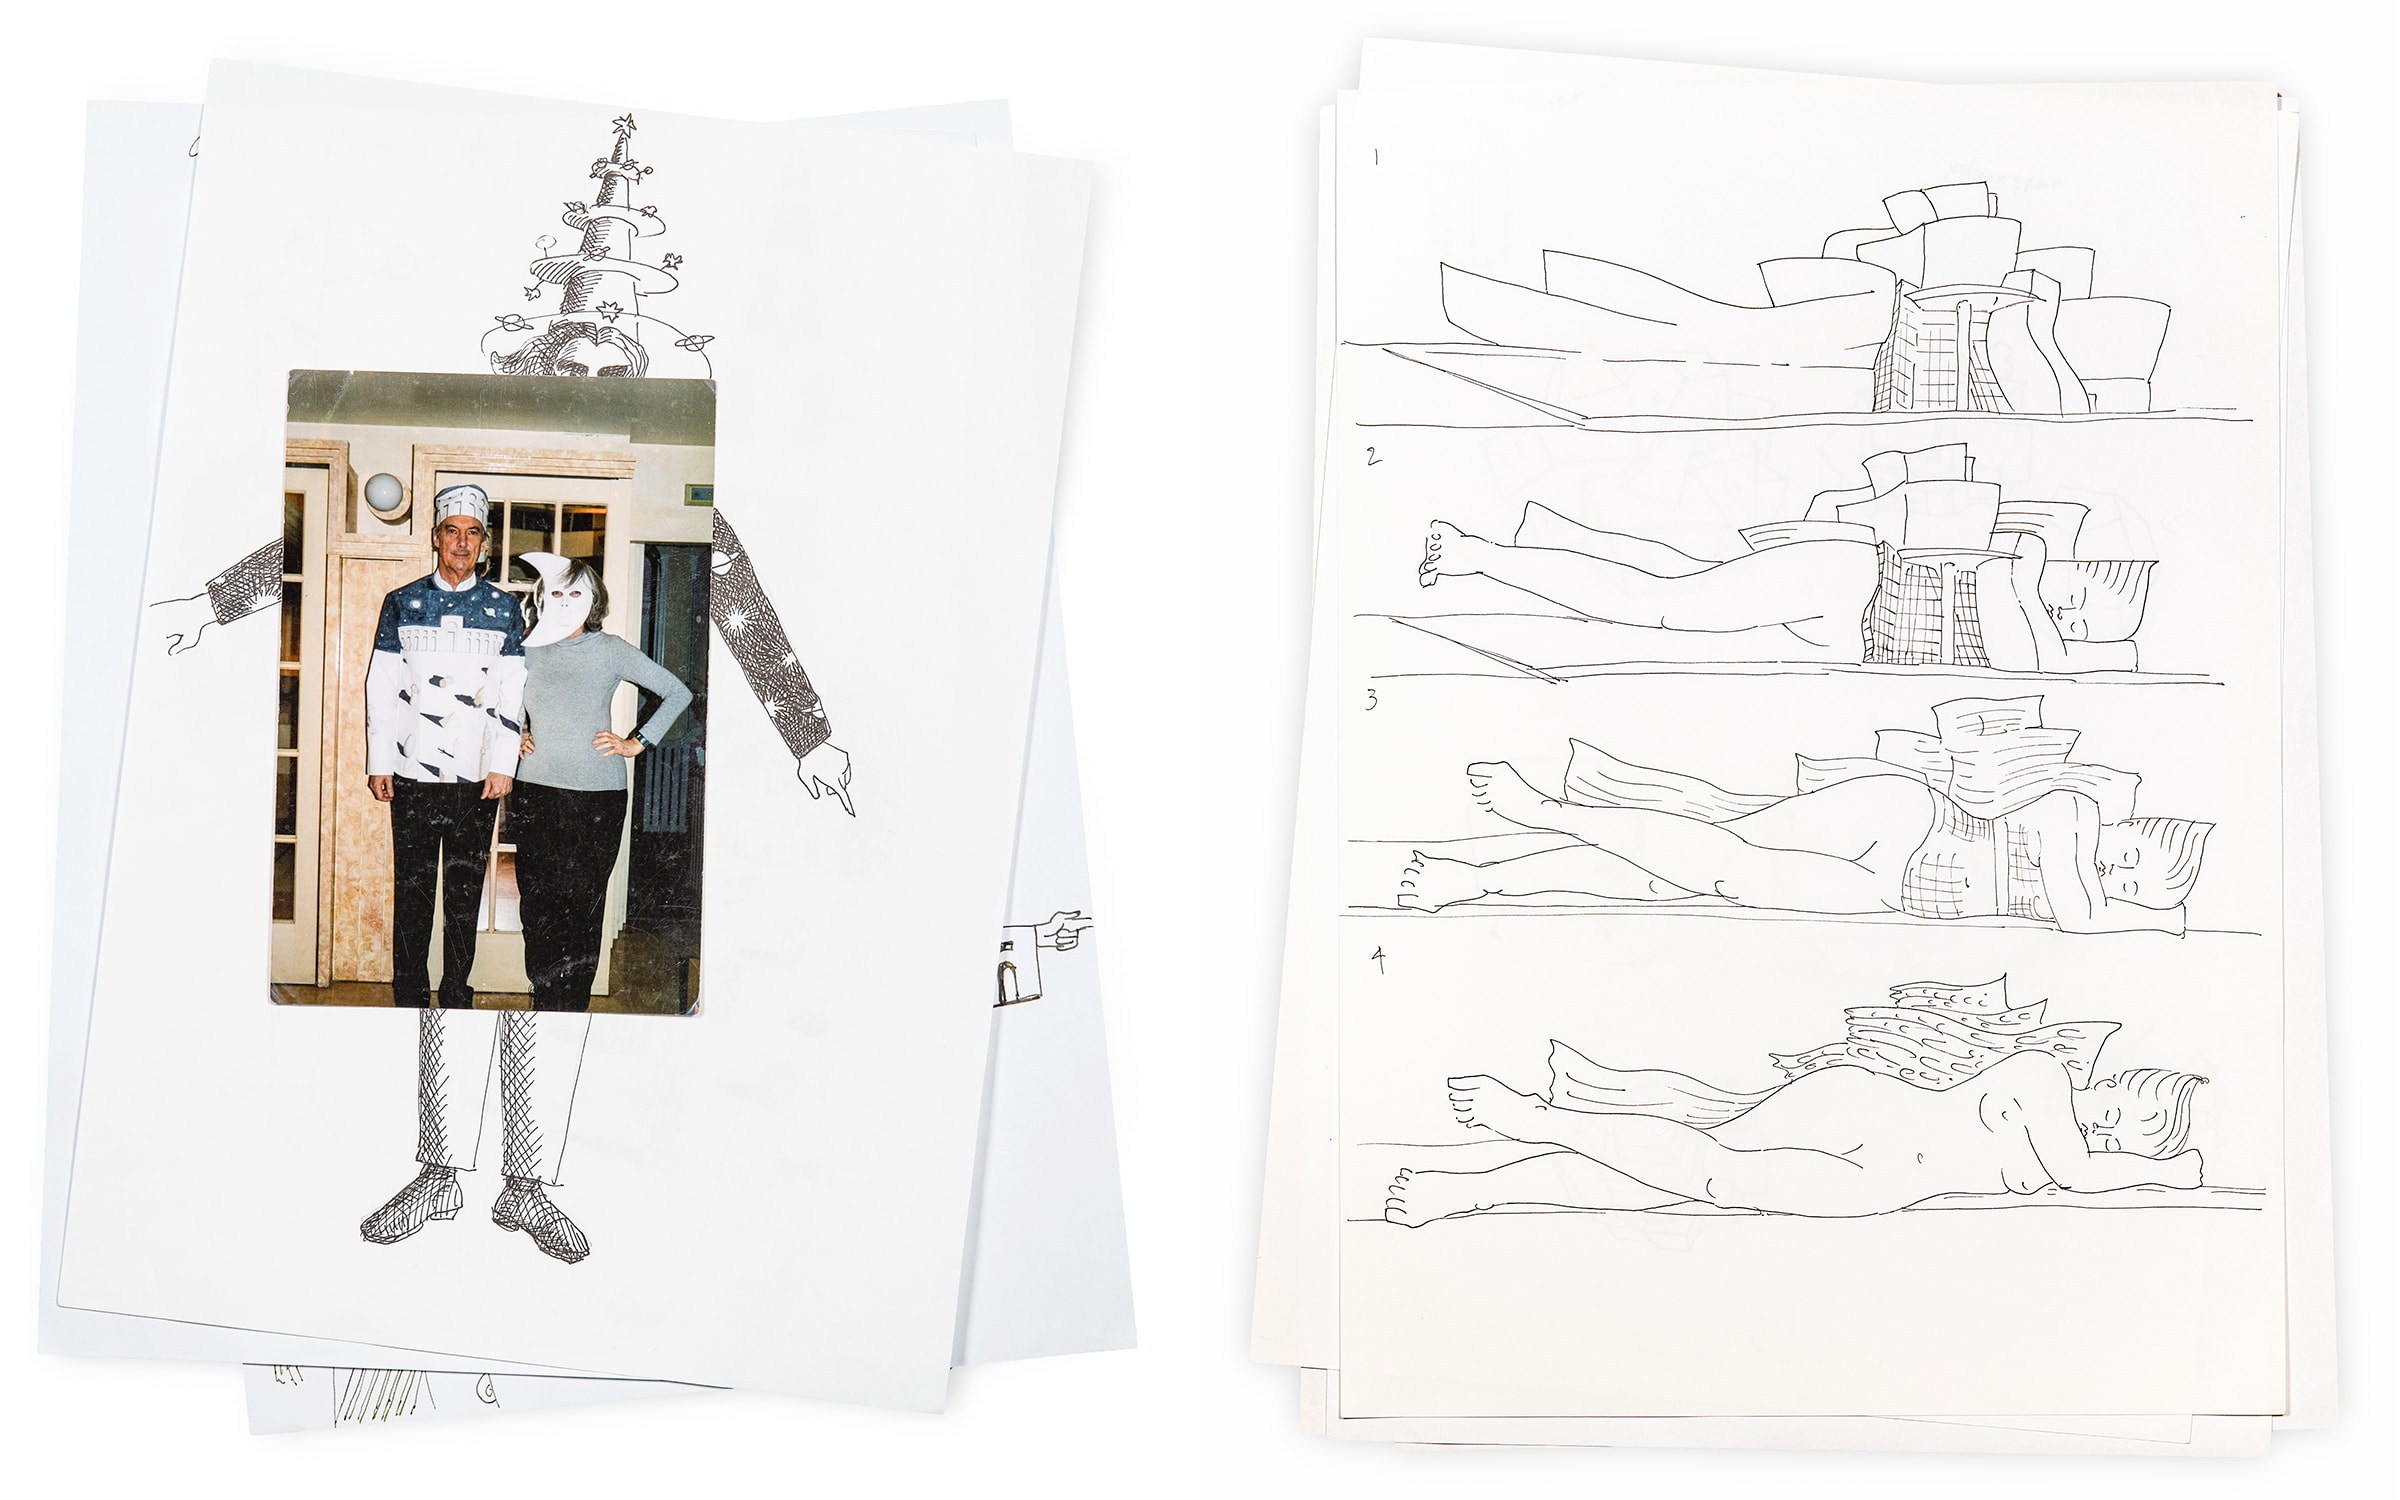 Left: Photograph of Madelon Vriesendorp and Charles Jencks wearing the Cosmic Suit at The Cosmic House, with drawings of the design of the Cosmic Suit for Charles Jencks, c. 2009. Right: Madelon Vriesendorp, Illustration of Bilbao Guggenheim as an Enigmatic Signifier for Charles Jencks’ The Iconic Building: The Power of Enigma by Charles Jencks, c. 2005. Photographs by Giulio Sheaves.